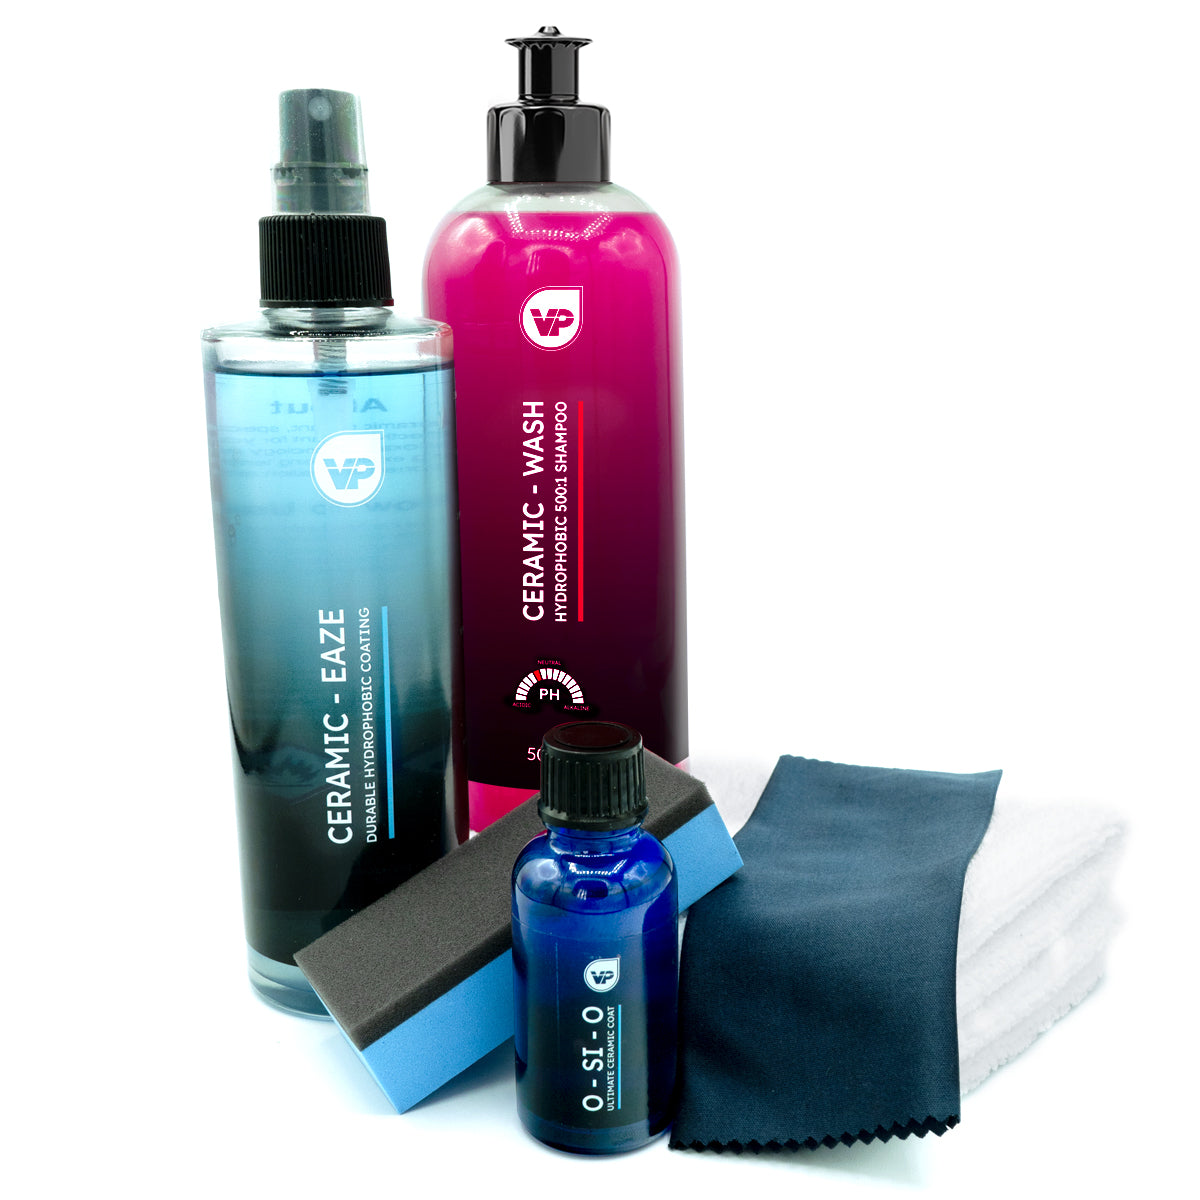 ultimate ceramic kit 3 year protection hard coating, 1 year top up and shampoo